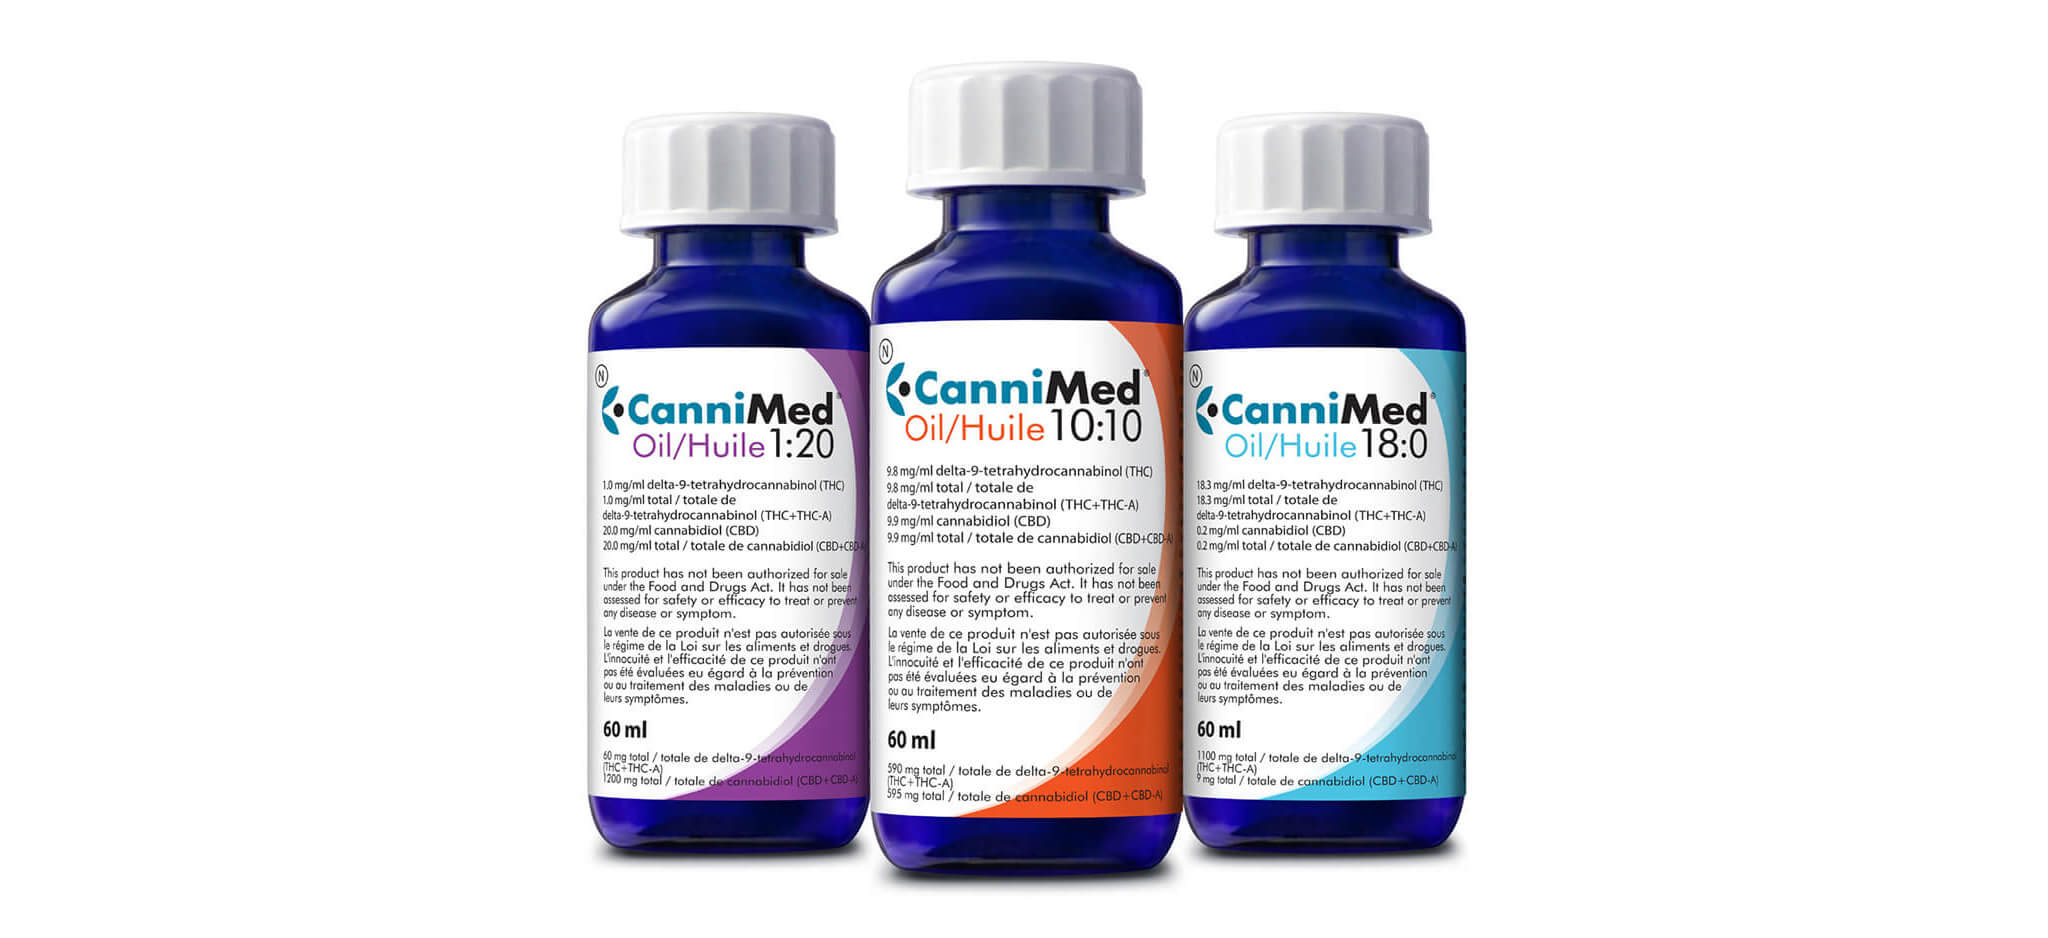 Cannabis Oil Product Information